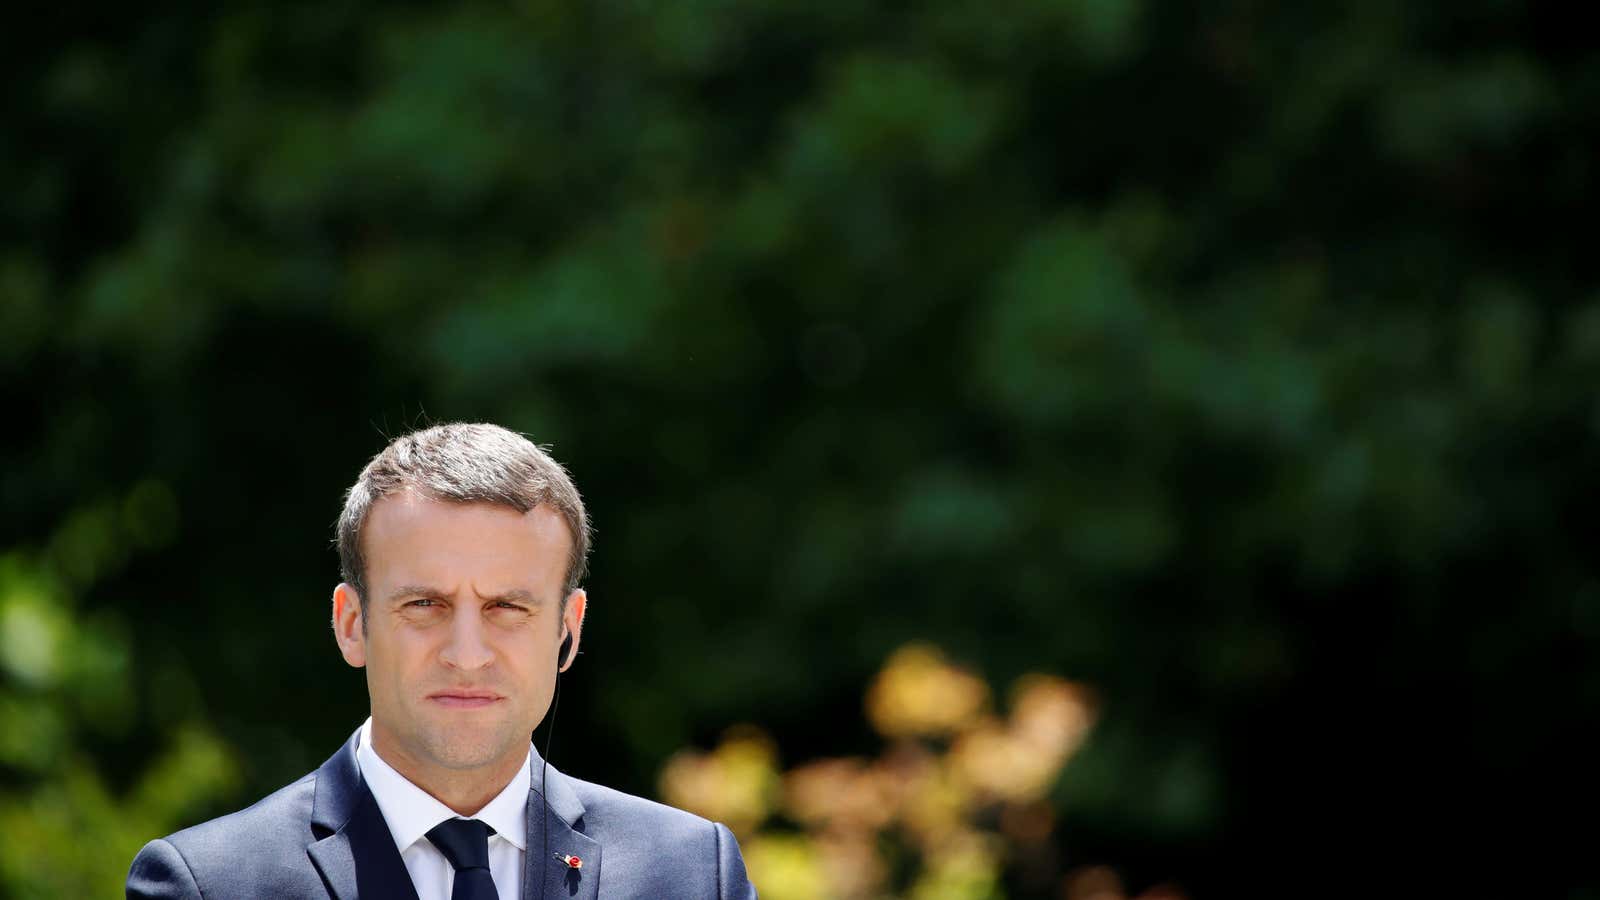 Macron’s centrist approach is influenced by a French philosopher.